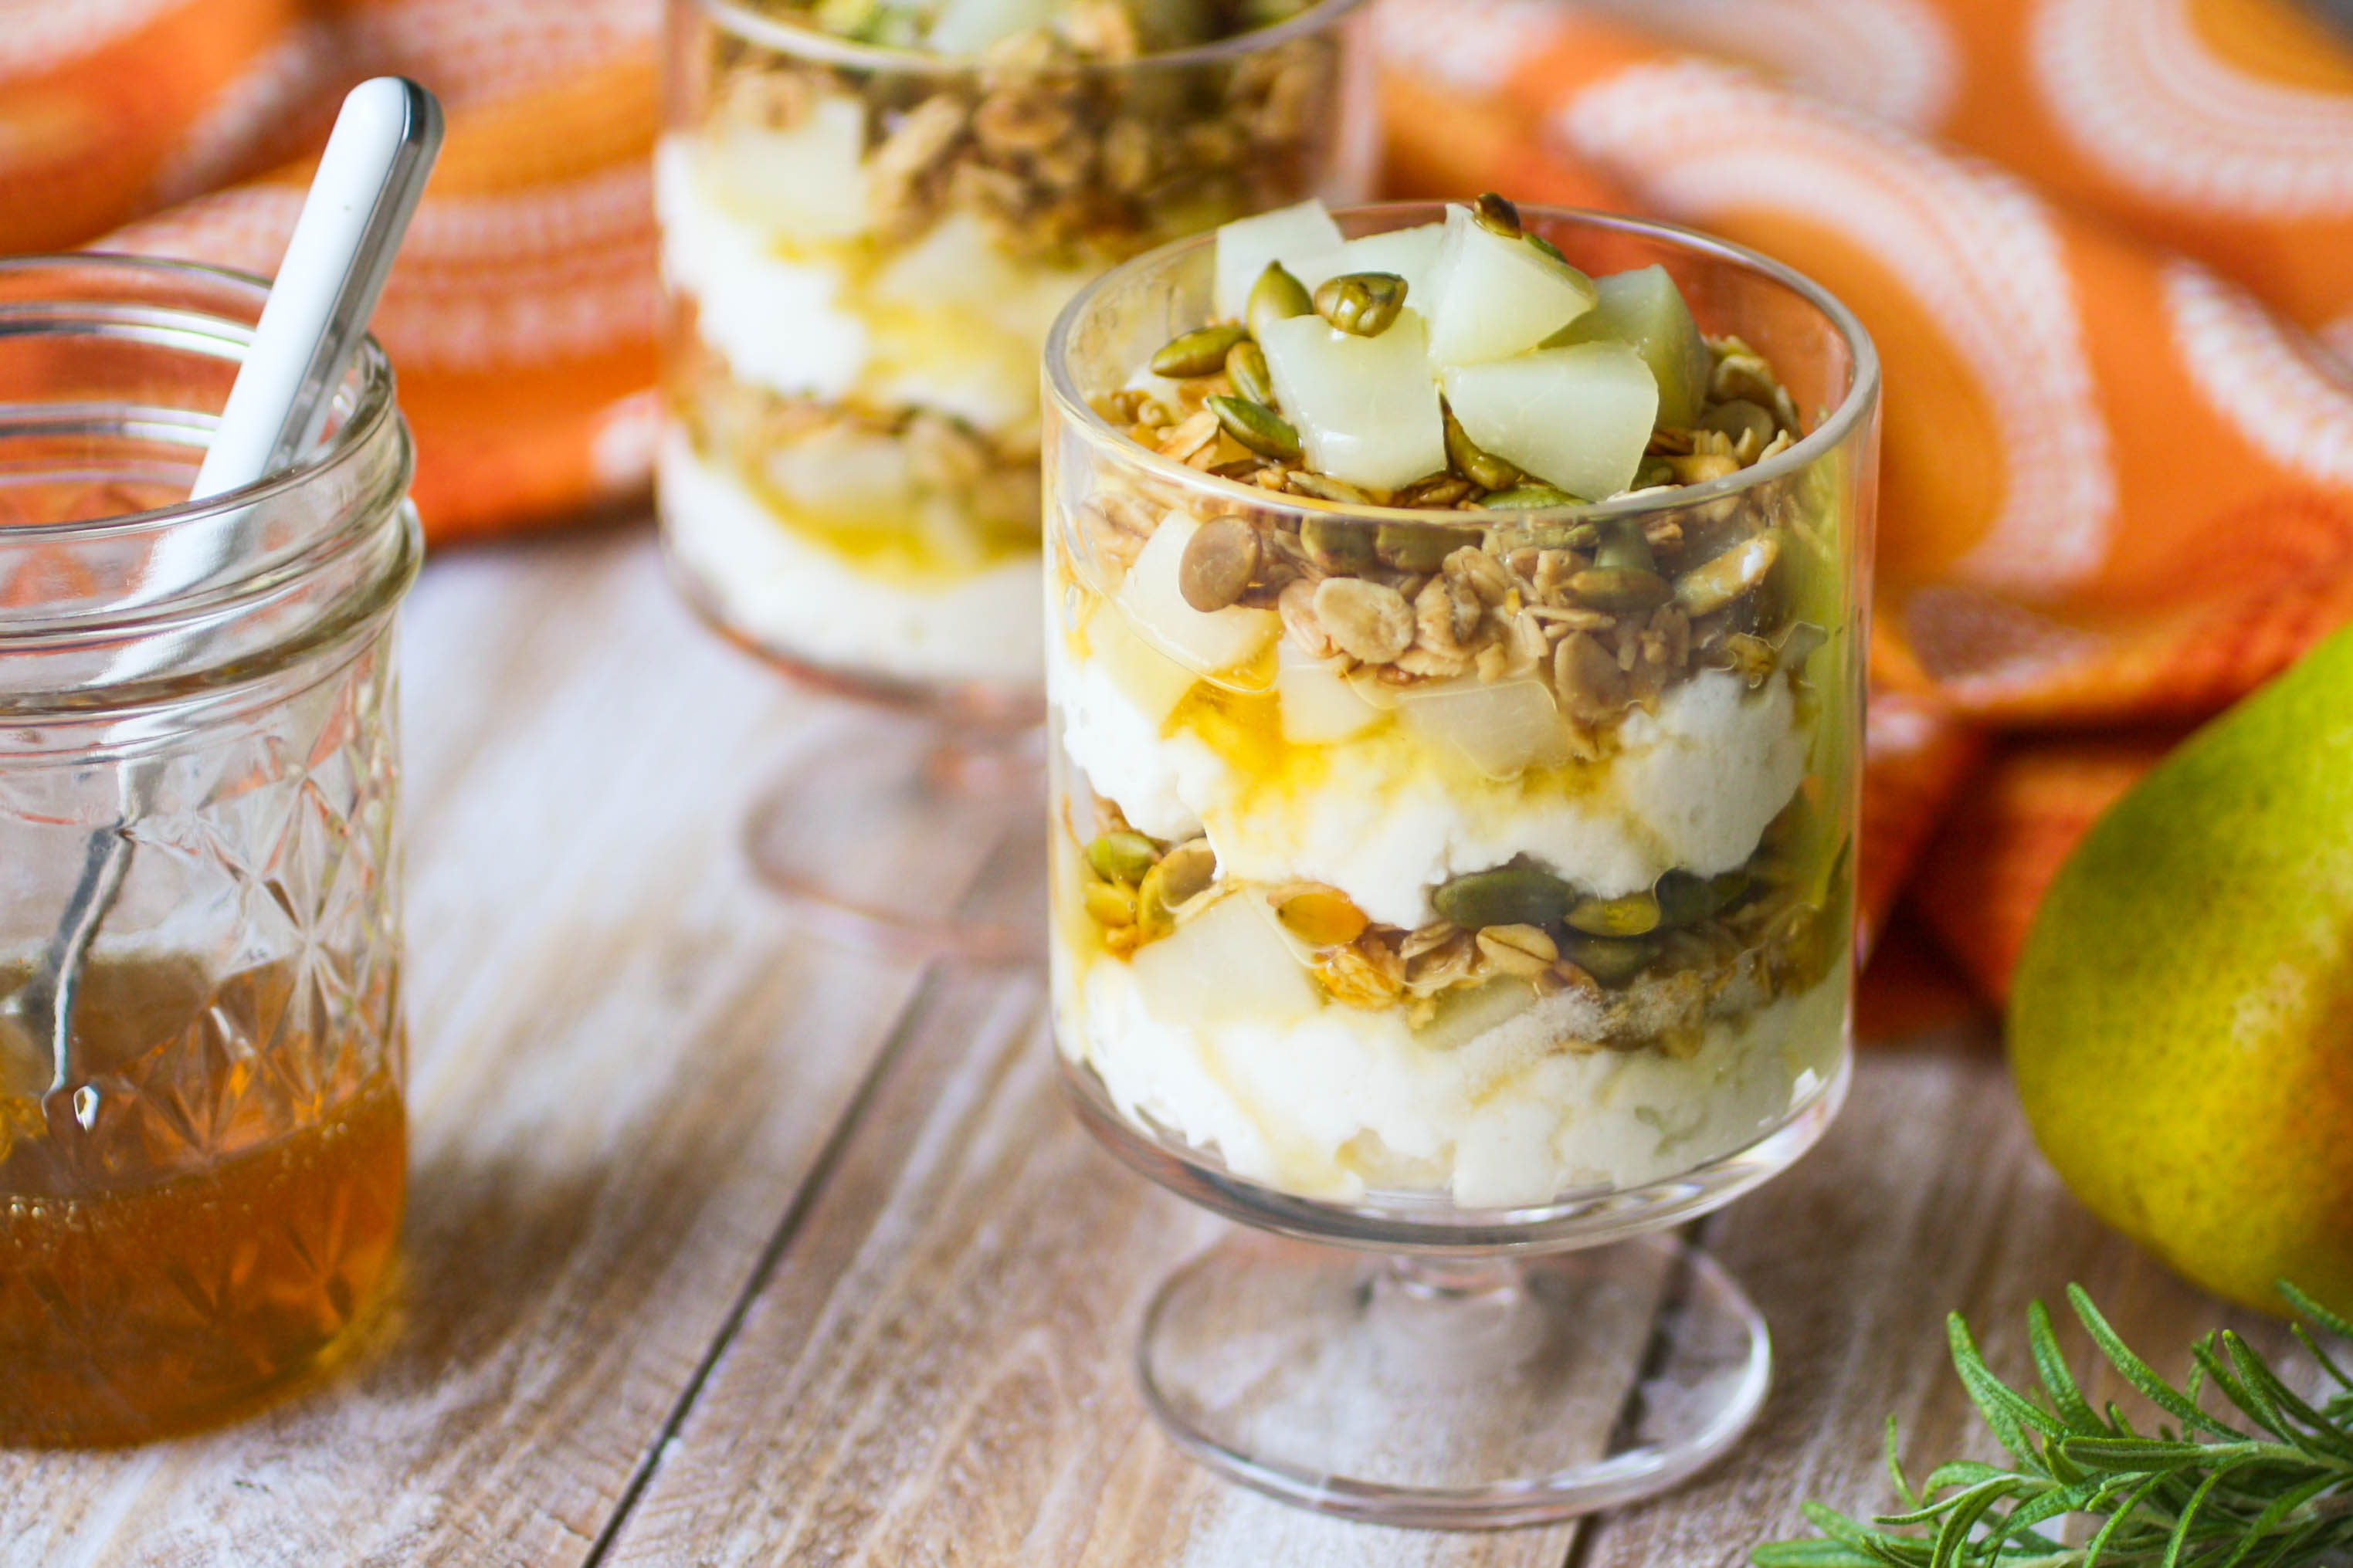 Pear and Ricotta Parfaits with Rosemary-Infused Honey is a wonderful treat! You'll love these parfaits for either breakfast or dessert!